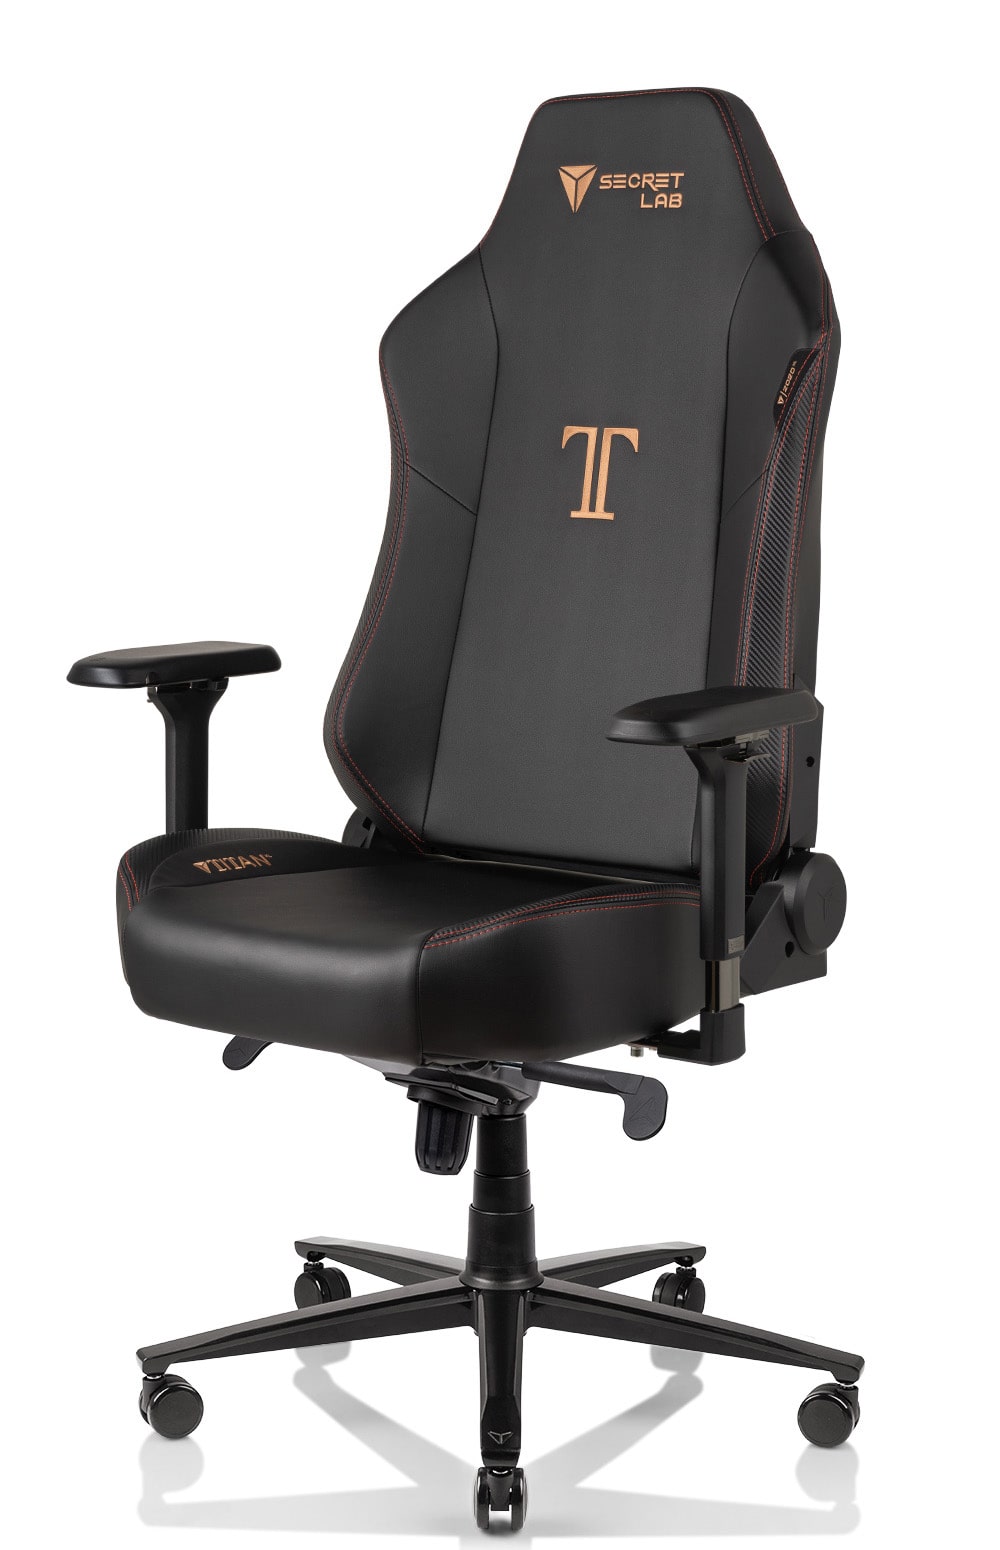 It will only cost you $30 to turn your desk chair into an